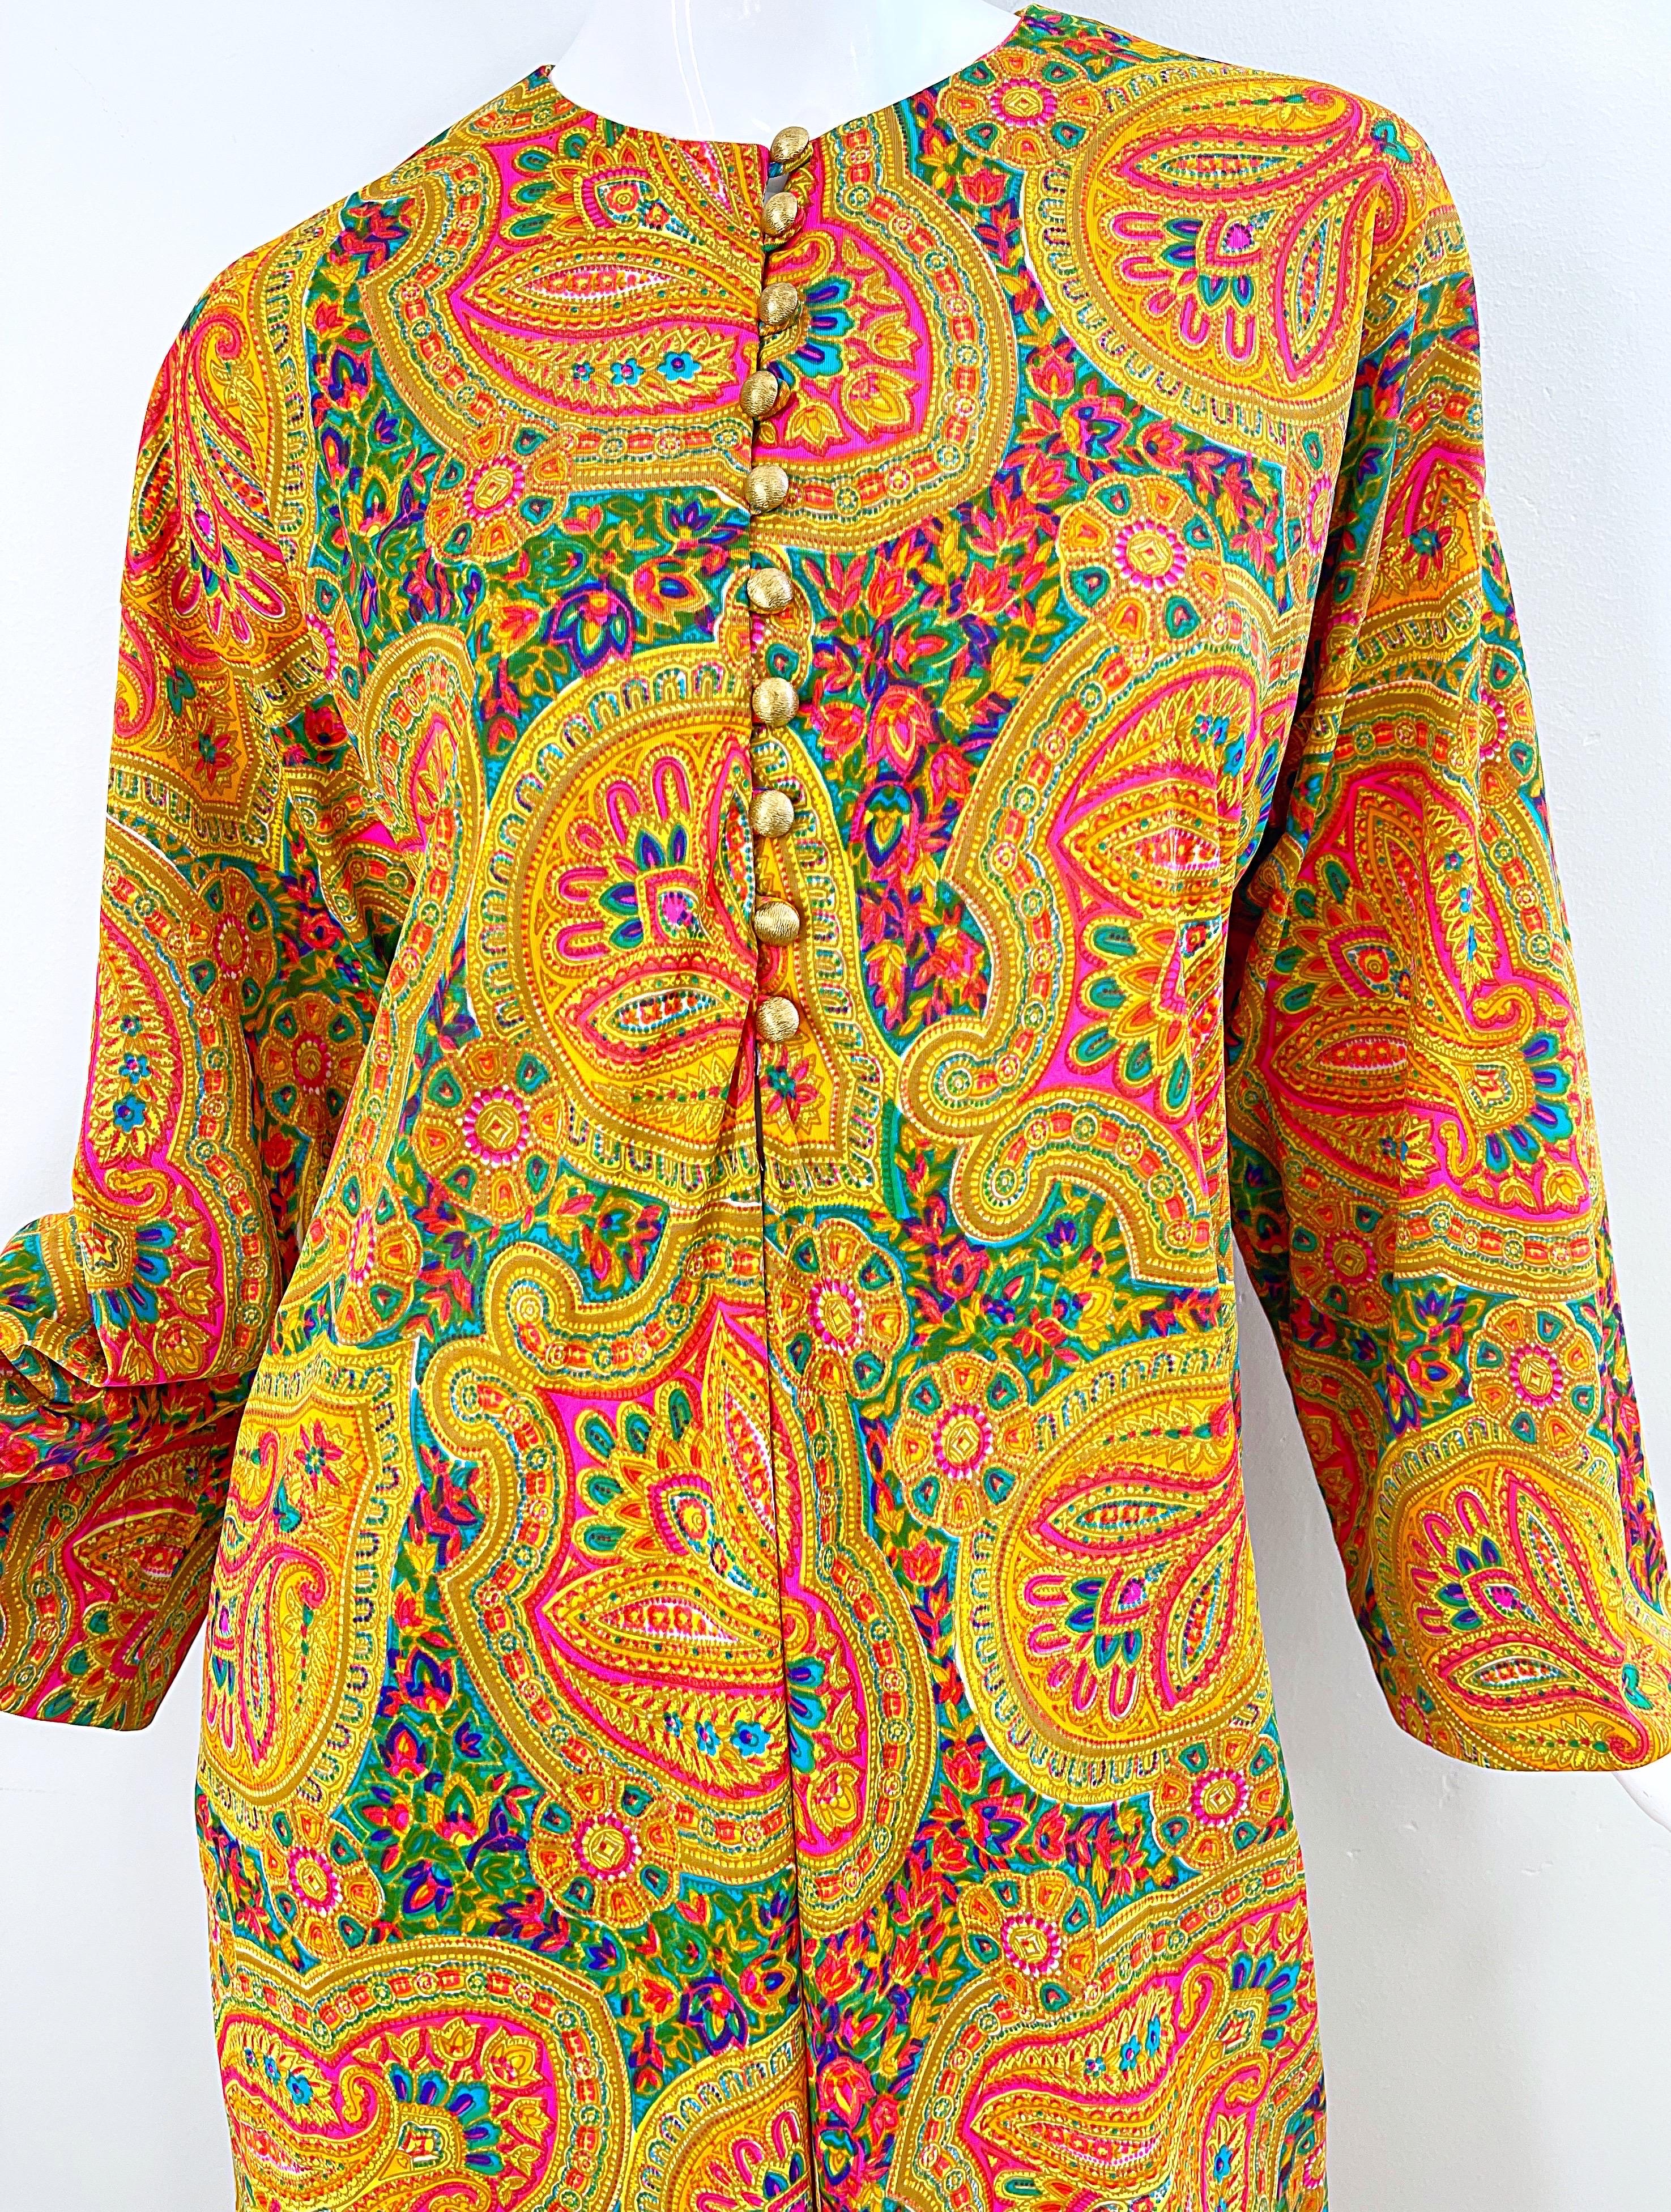 1970s Colorful Paisley Print Nylon Tunic Dress + Wide Leg Trousers Vintage Set In Excellent Condition For Sale In San Diego, CA